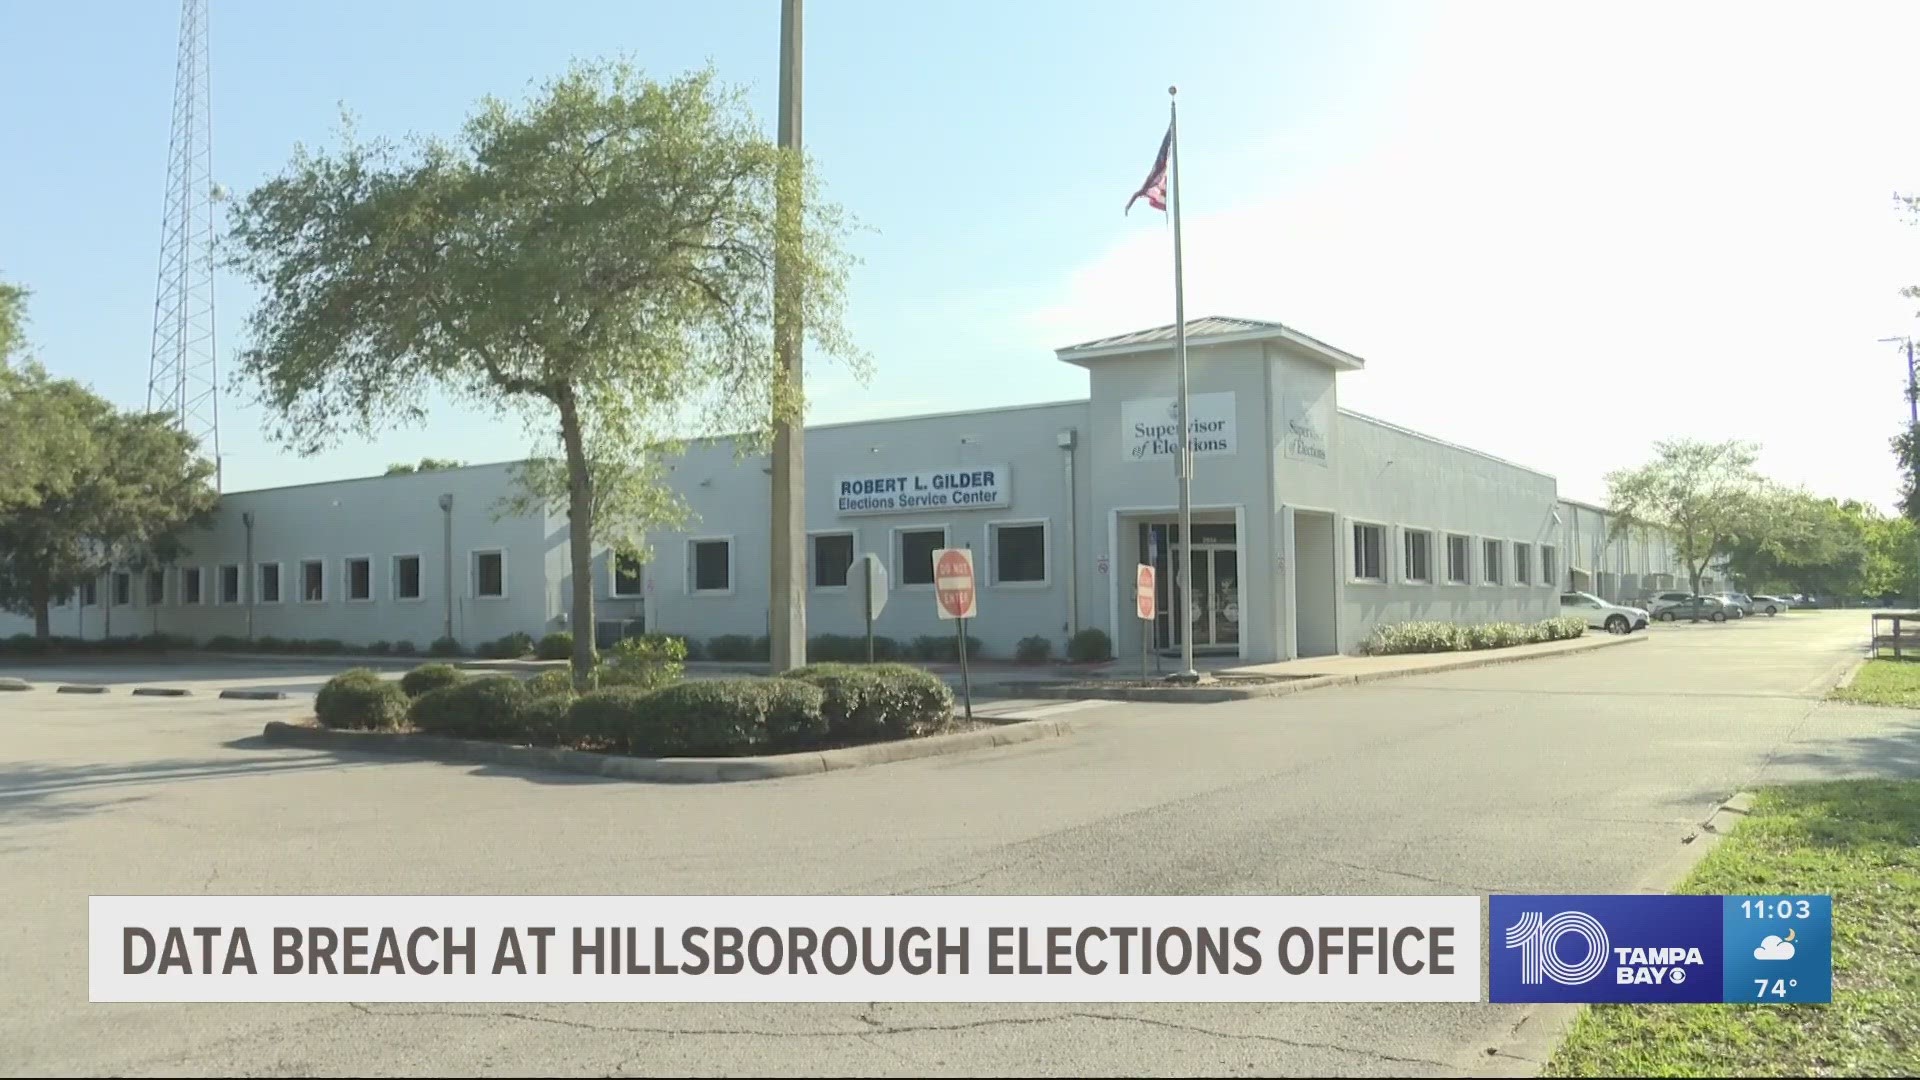 Officials believe the unauthorized user accessed Hillsborough County voters' social security or driver's license numbers.